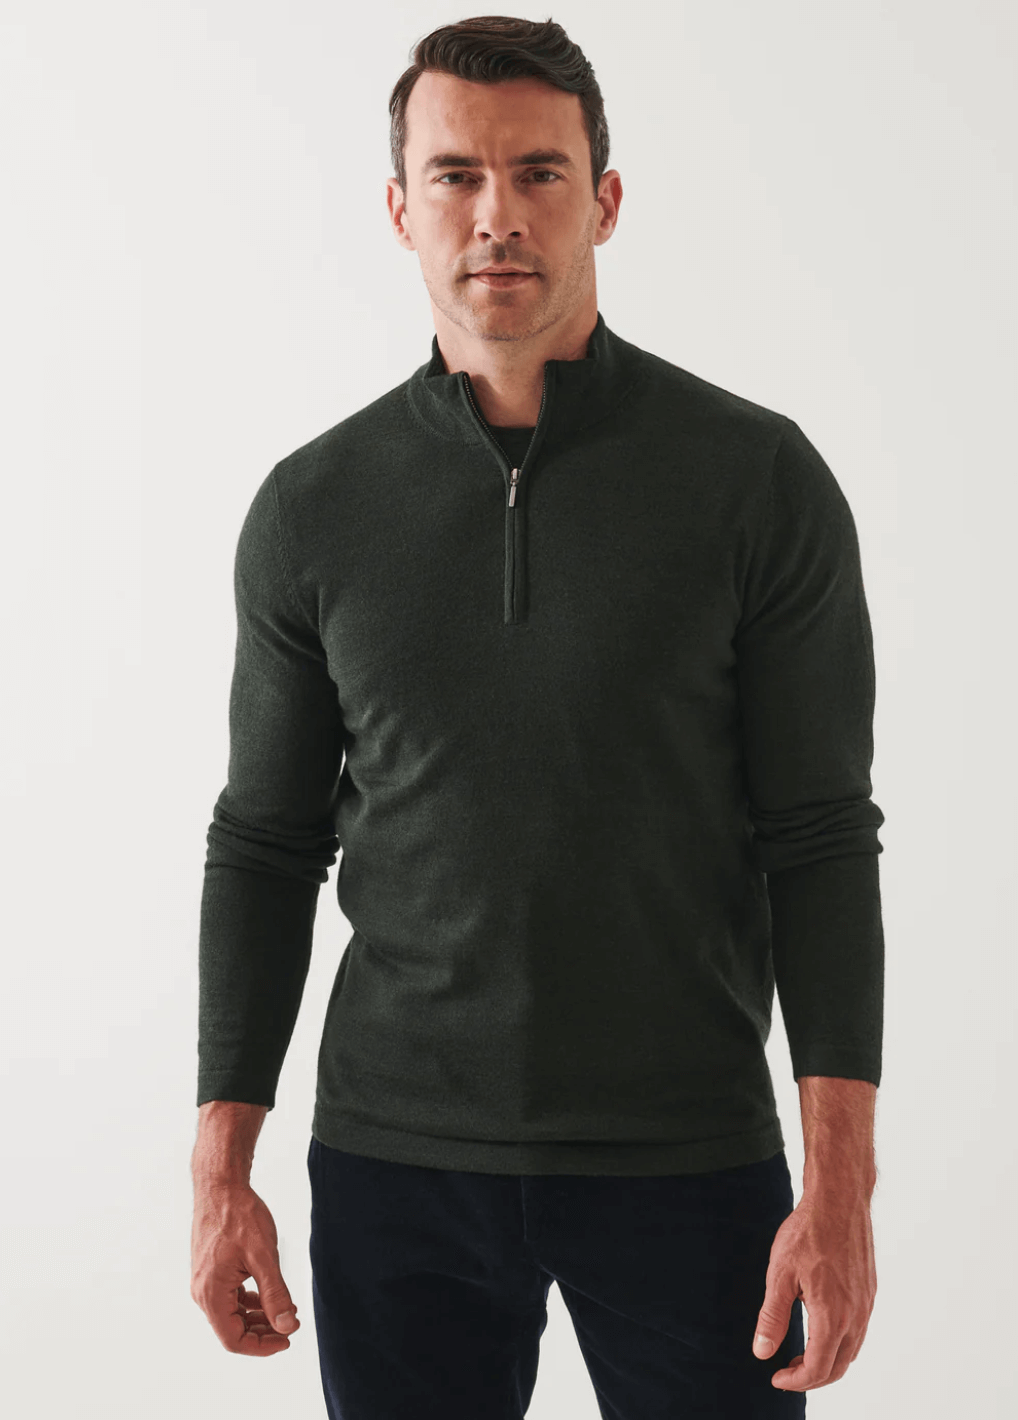 front view of the 14GG MERINO 1/4 ZIP MOCK NECK SWEATER in dark green, styled with dark pants